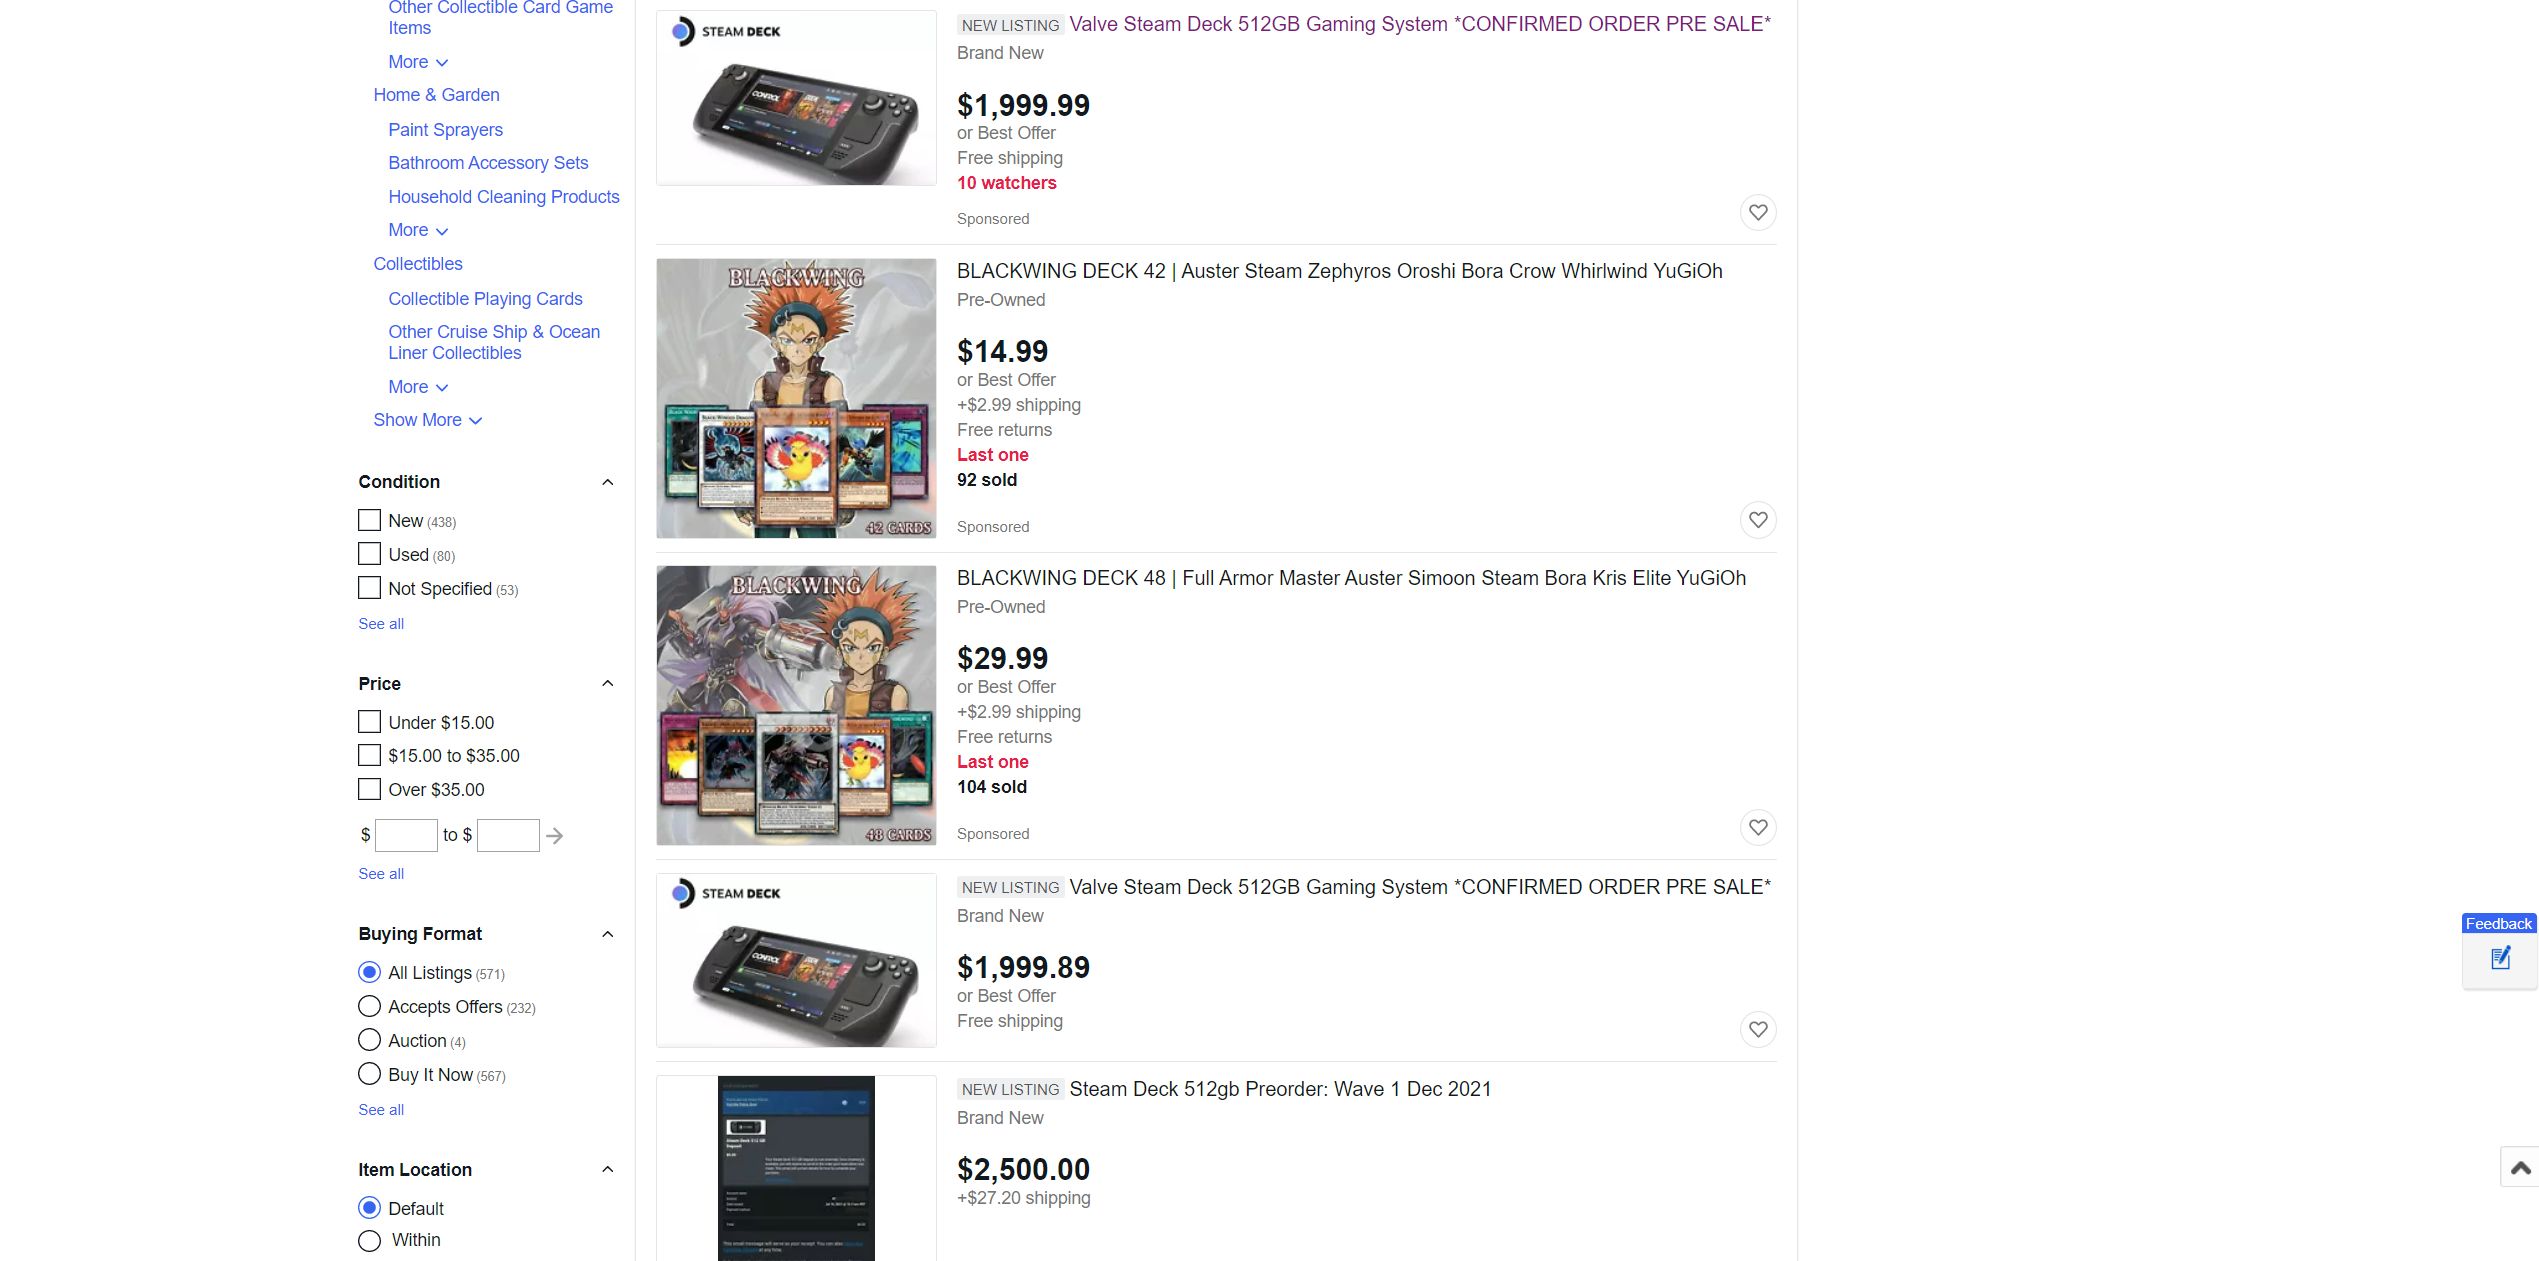 Steam Deck eBay Search Results Prices